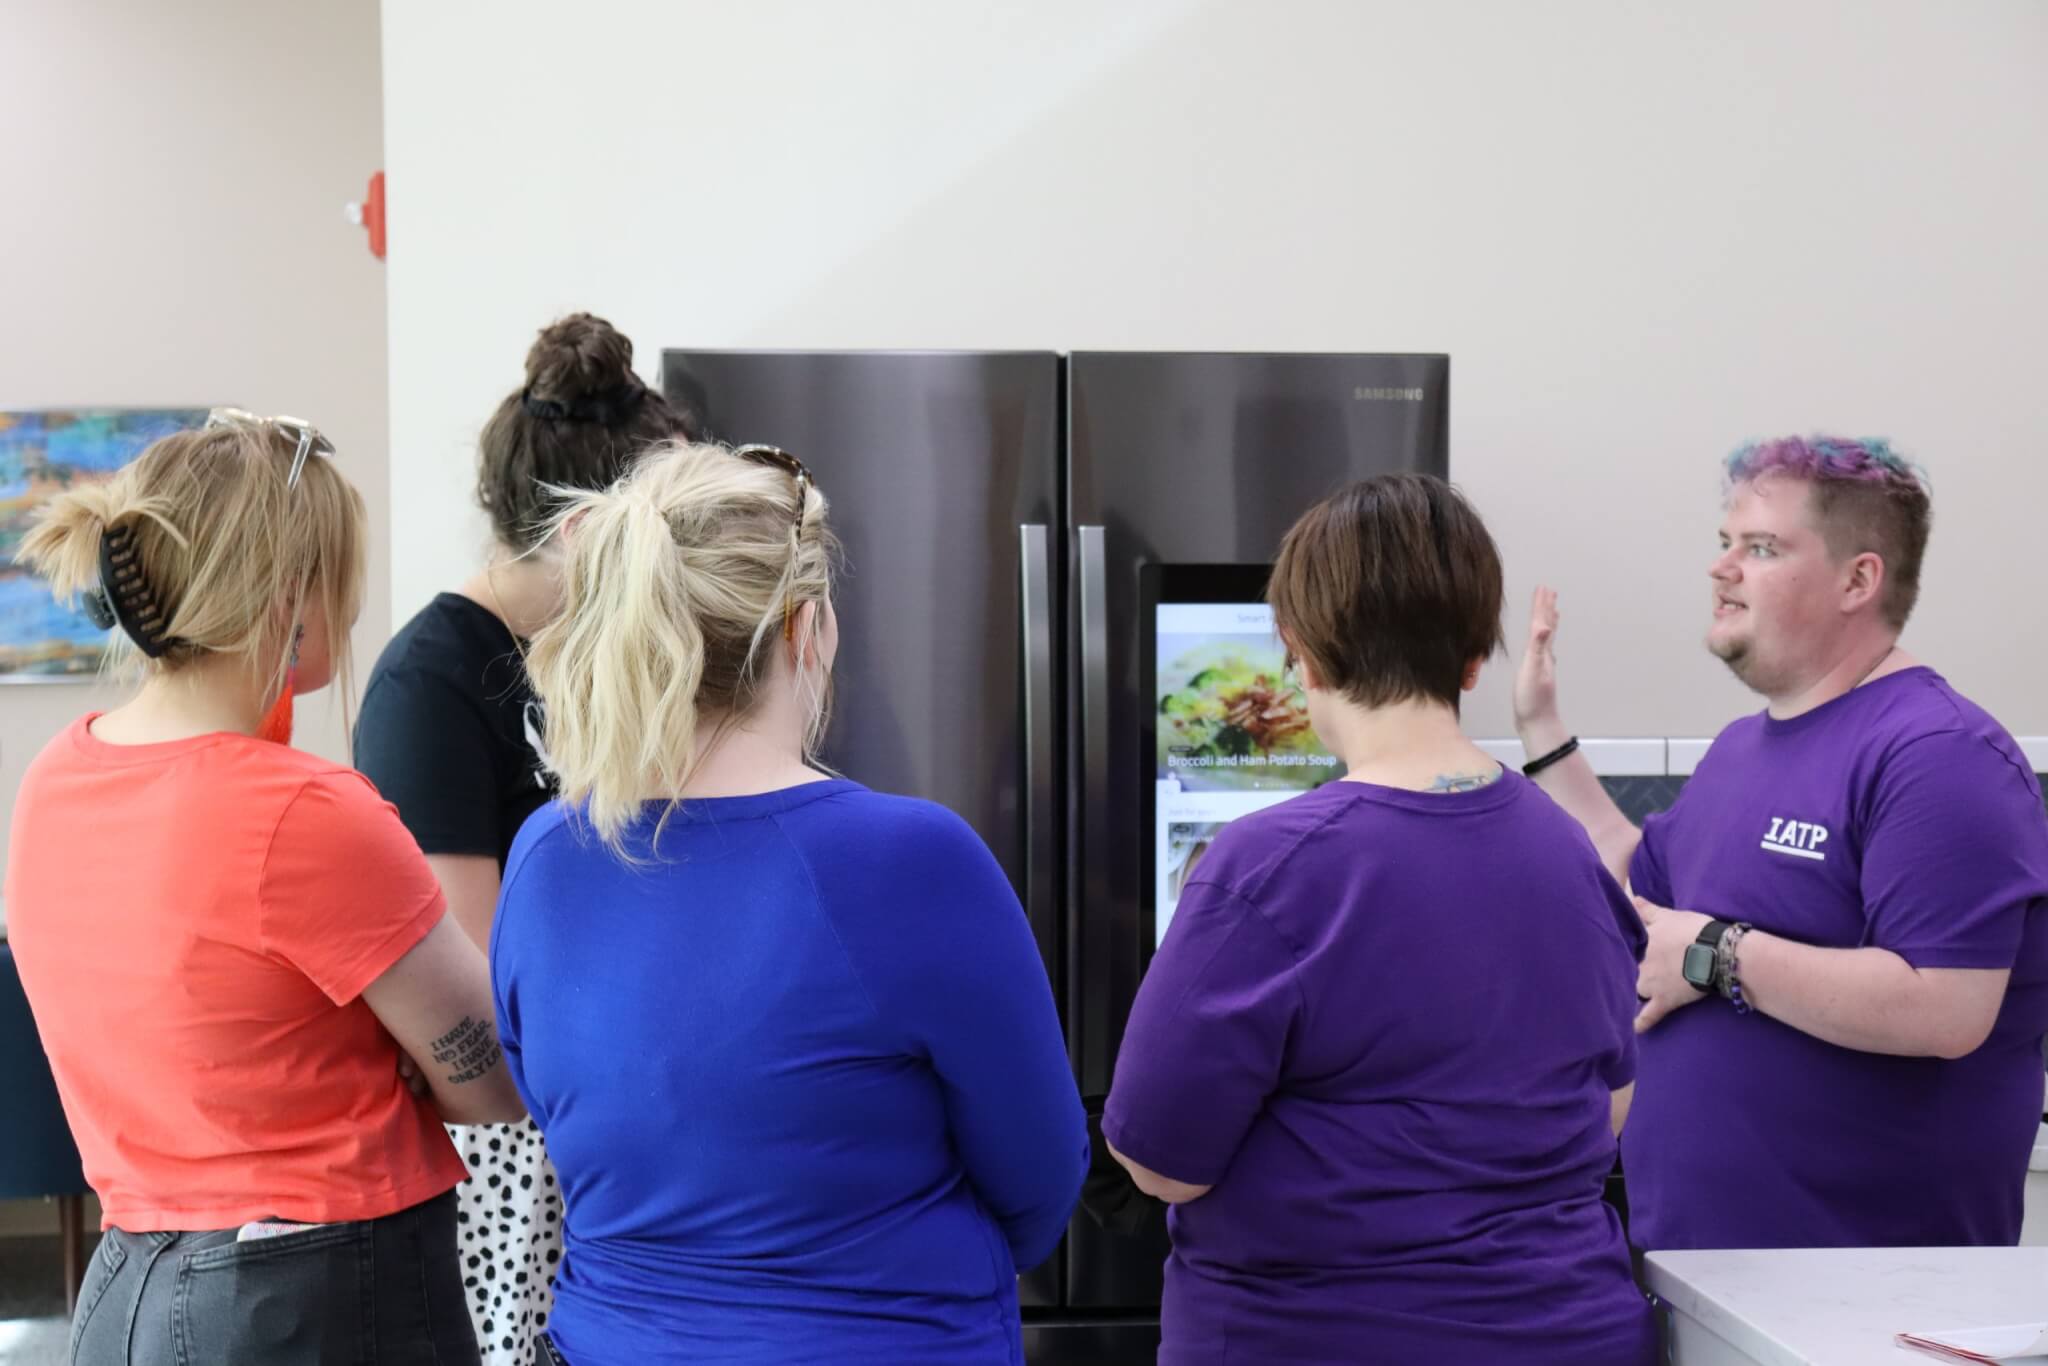 IATP staff member explaining the smart home technology refrigerator to a group of visitors.